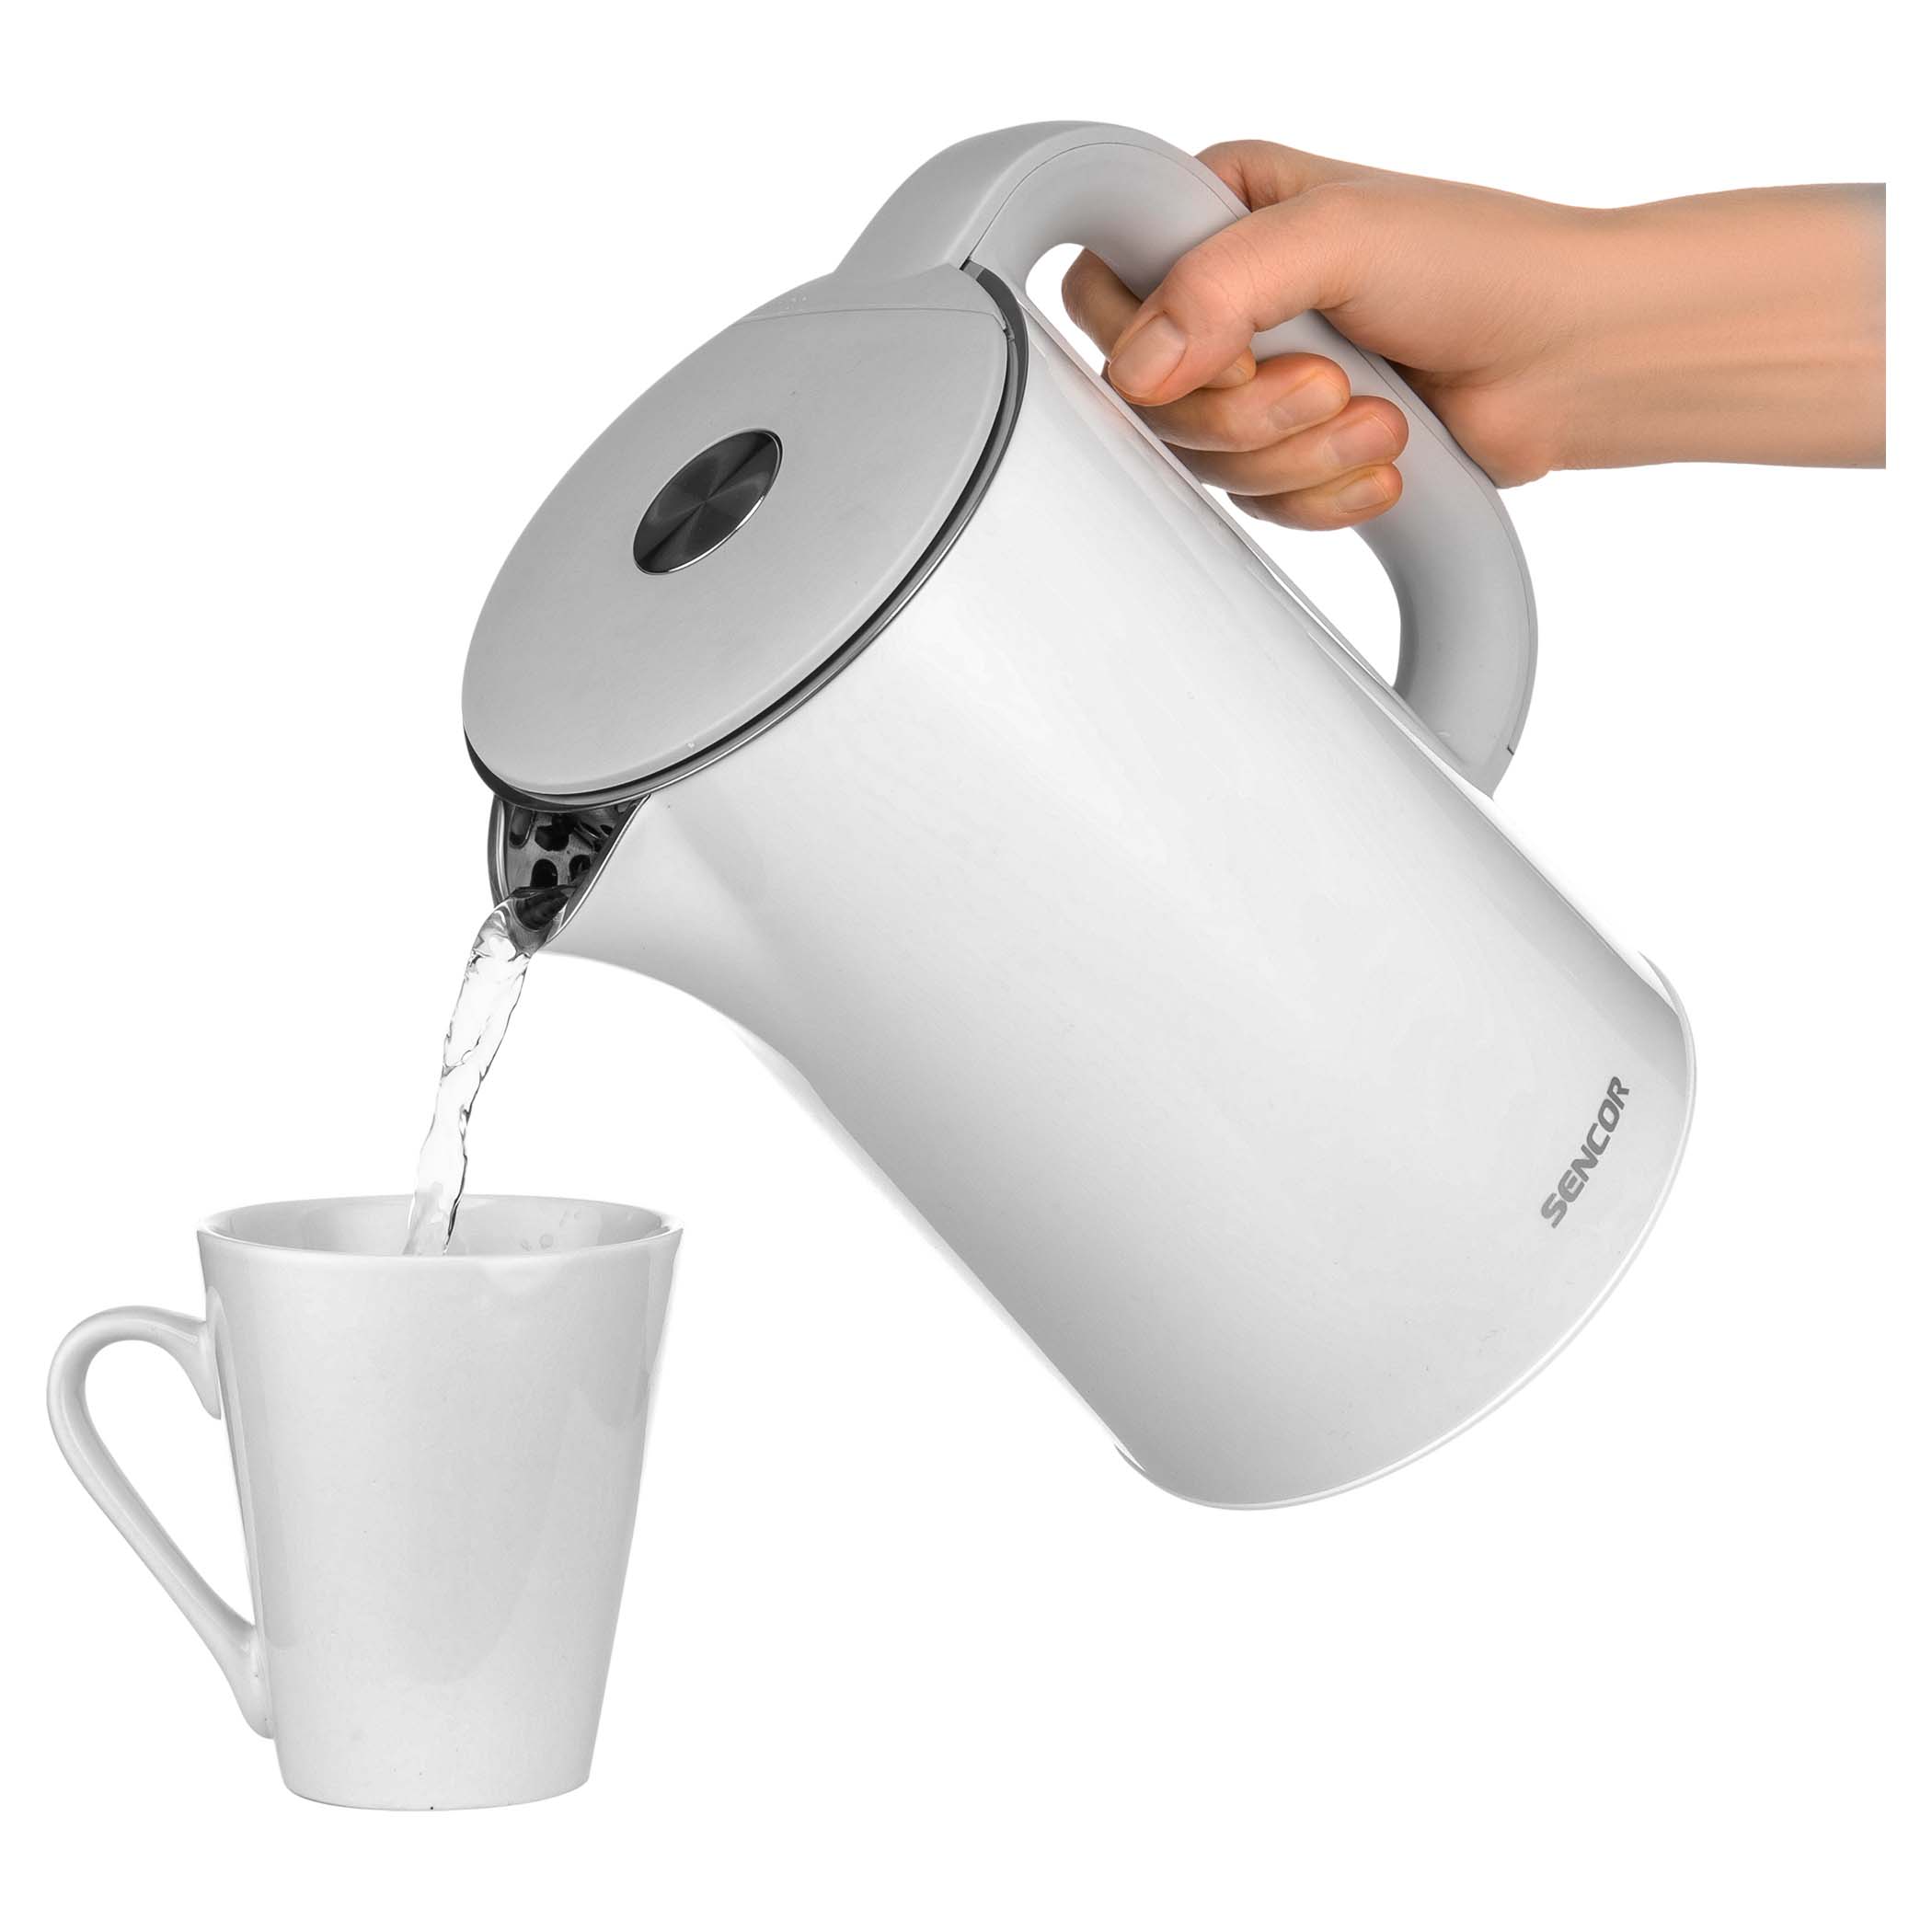 Double Wall Variable Temperature Electric Kettle, SWK 1591WH